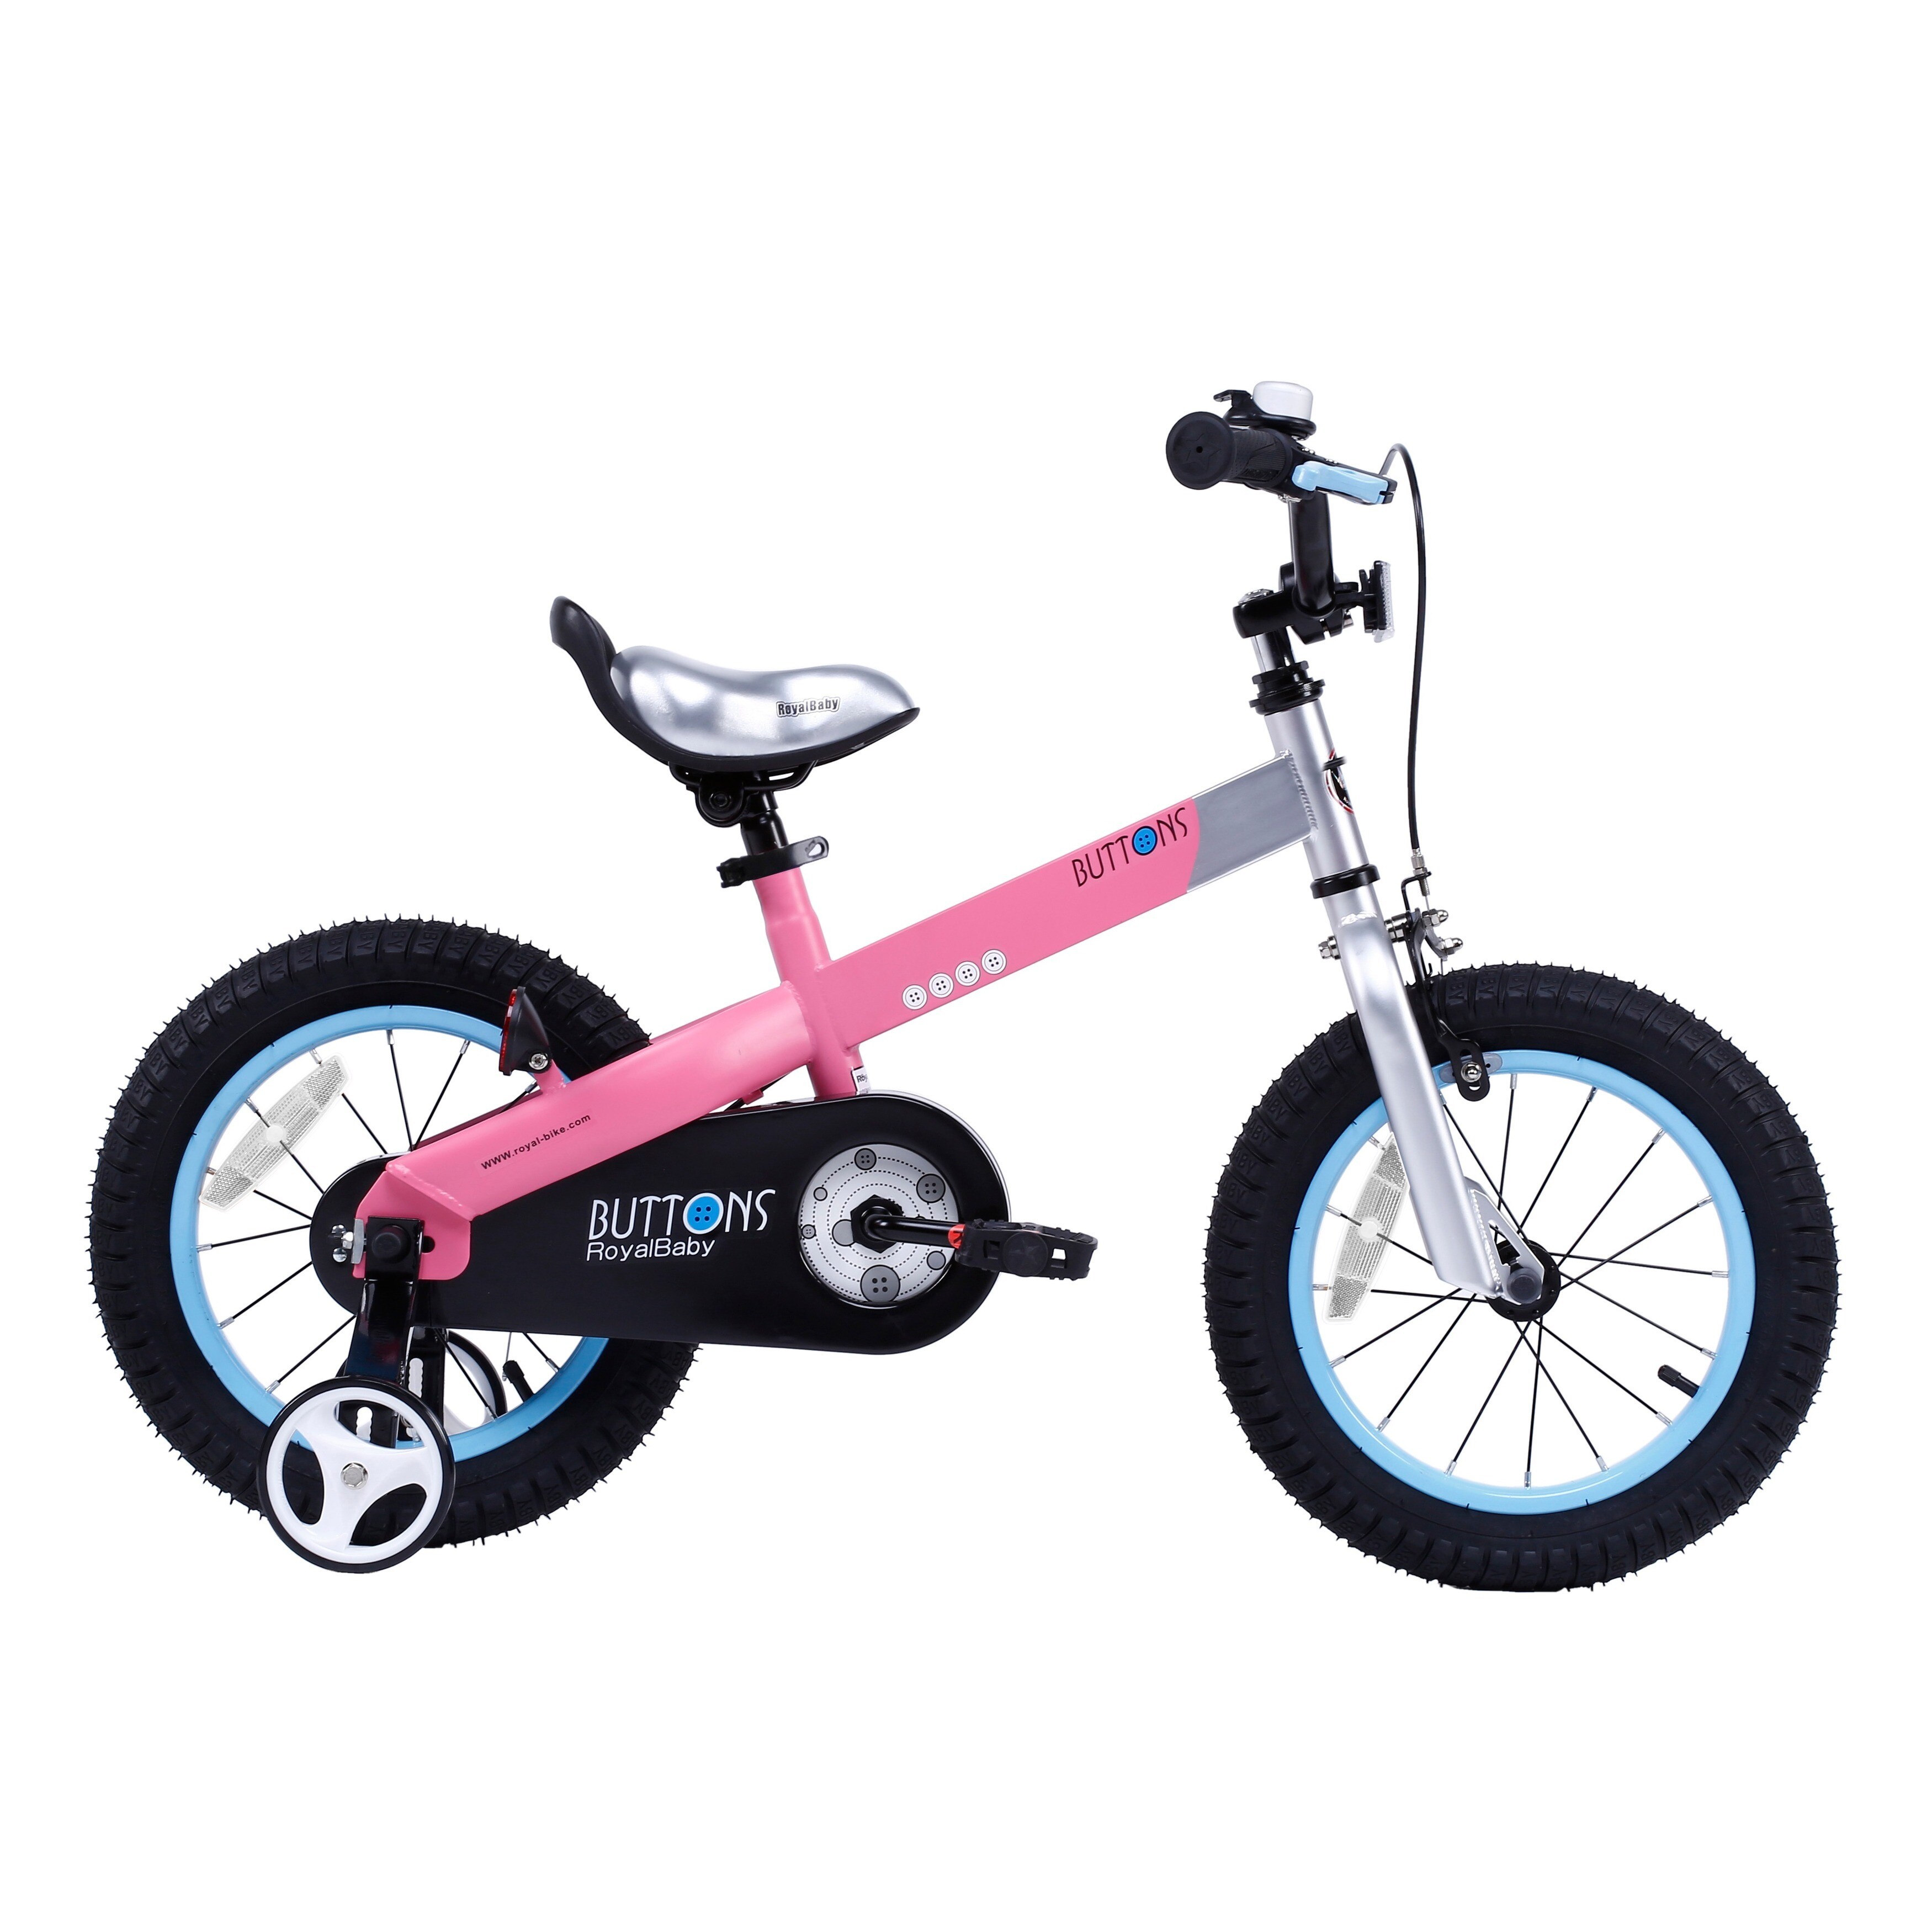 Royalbaby Matte Buttons 16 inch Kids Bike with Training Wheels 2643d1bc fe0c 4785 9302 30b450251efa 1